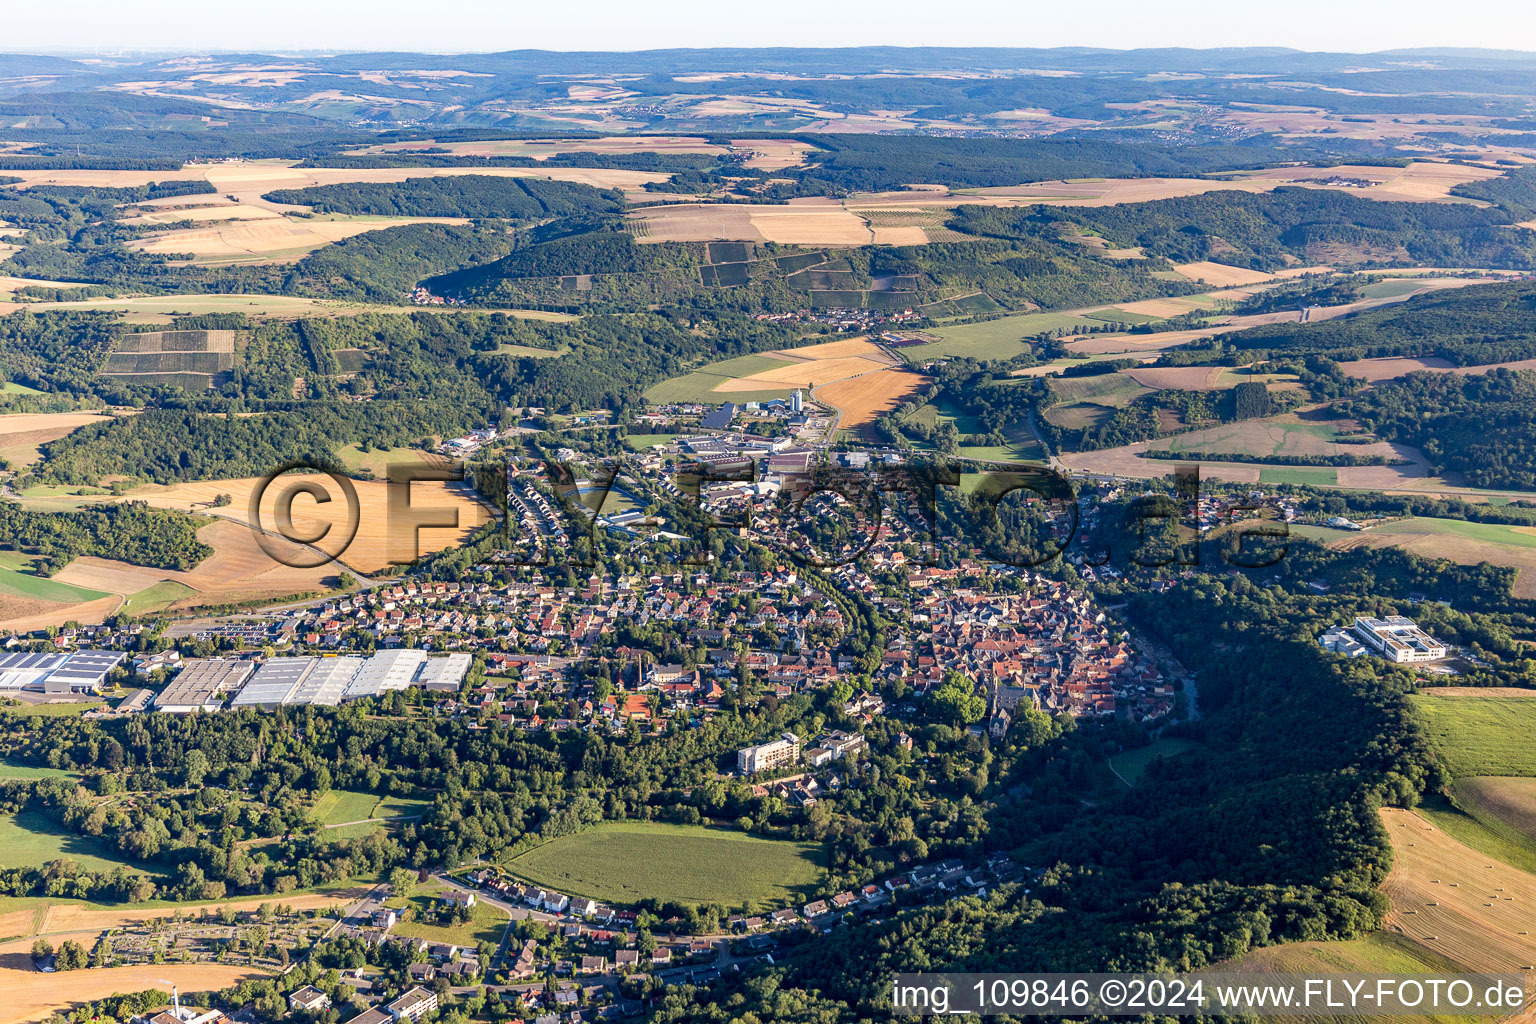 Location view of the streets and houses of residential areas in the Glan valley landscape surrounded by hills in Meisenheim in the state Rhineland-Palatinate, Germany